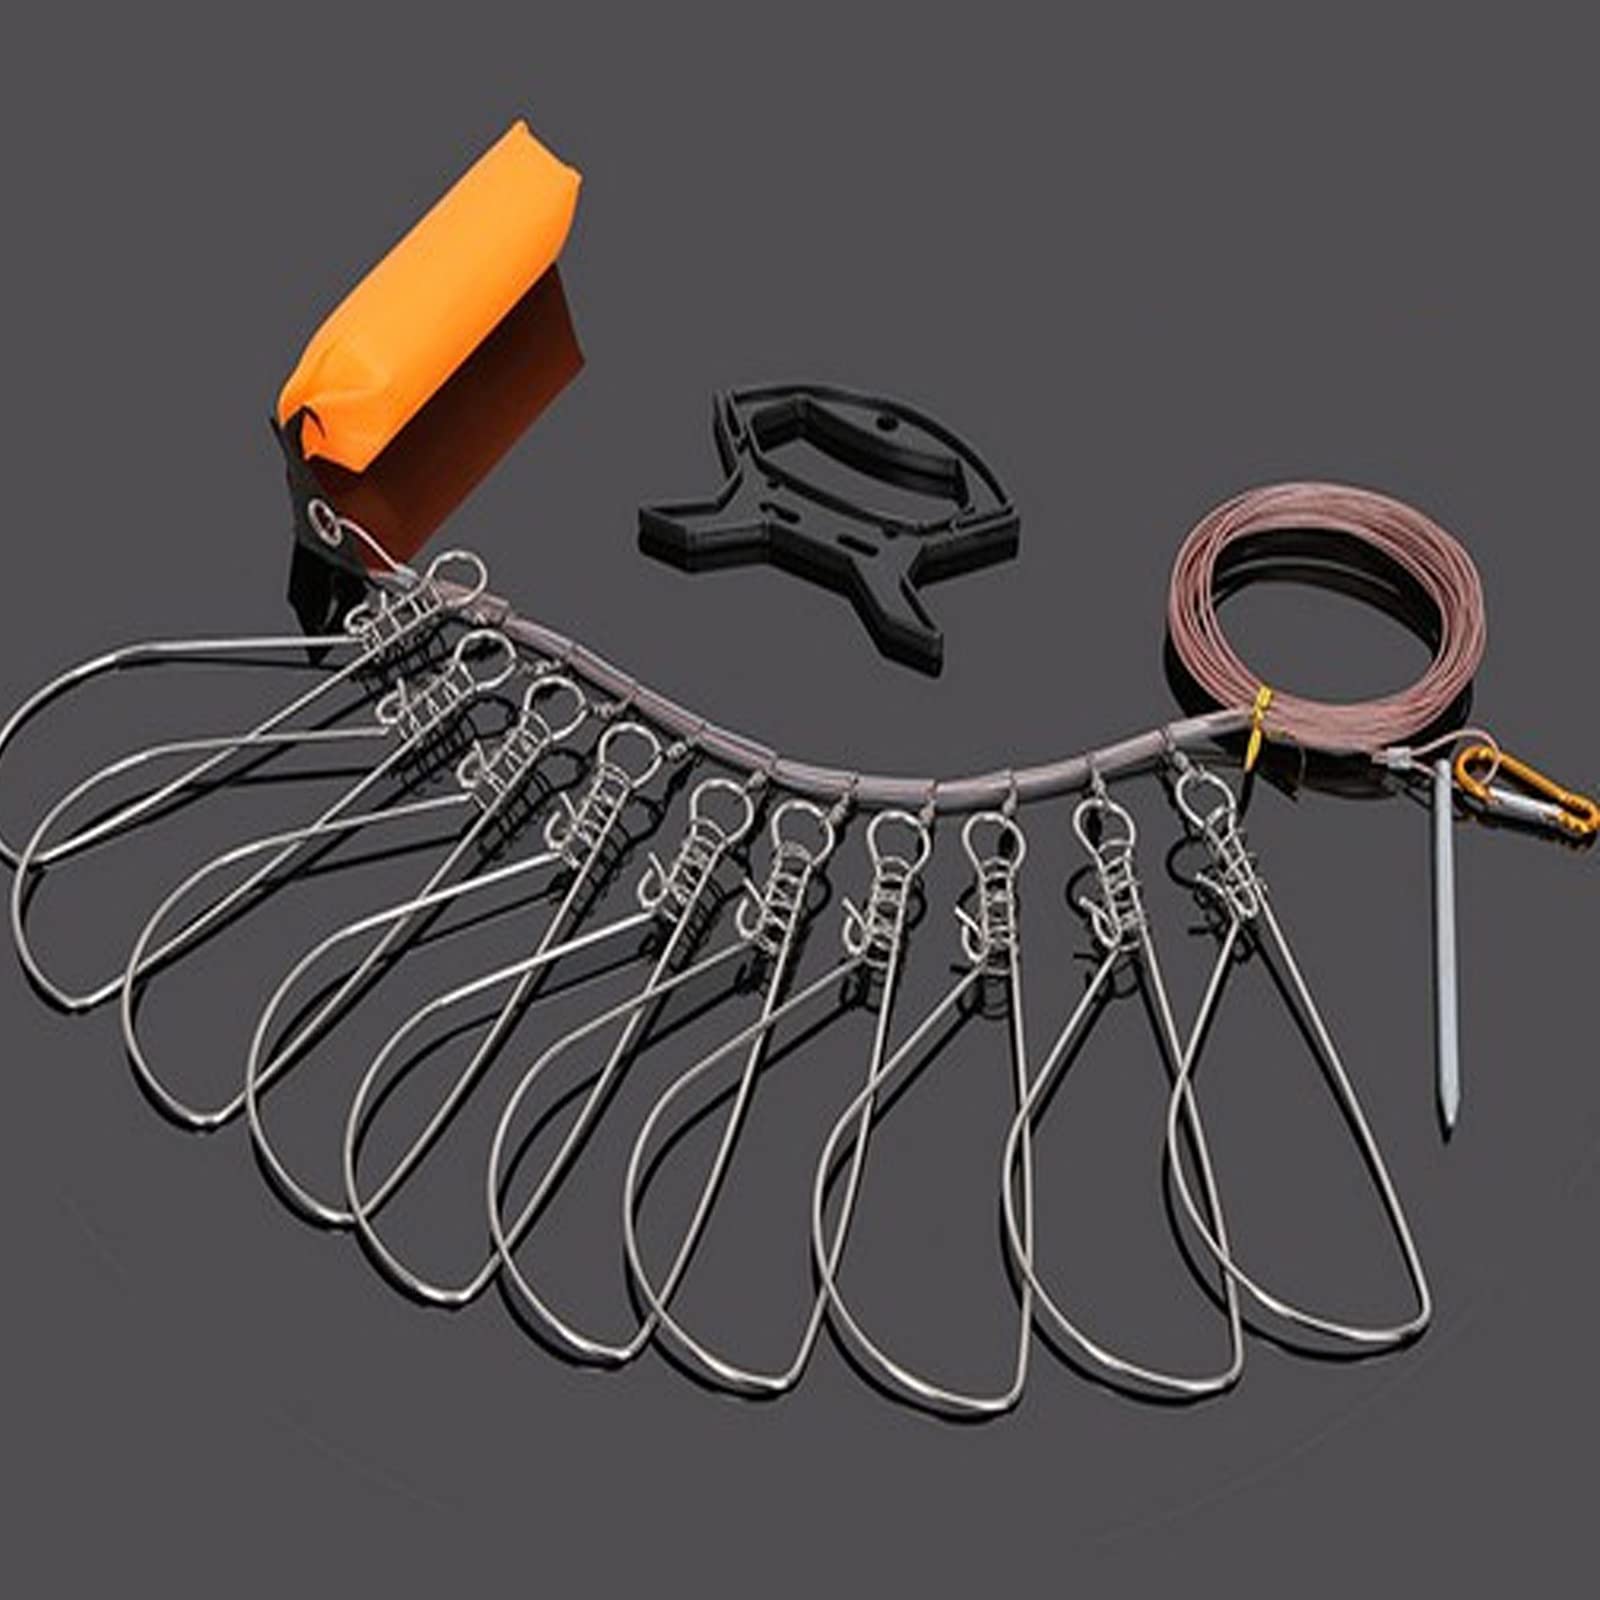 Fishing Accessories: Fish Stringers & More